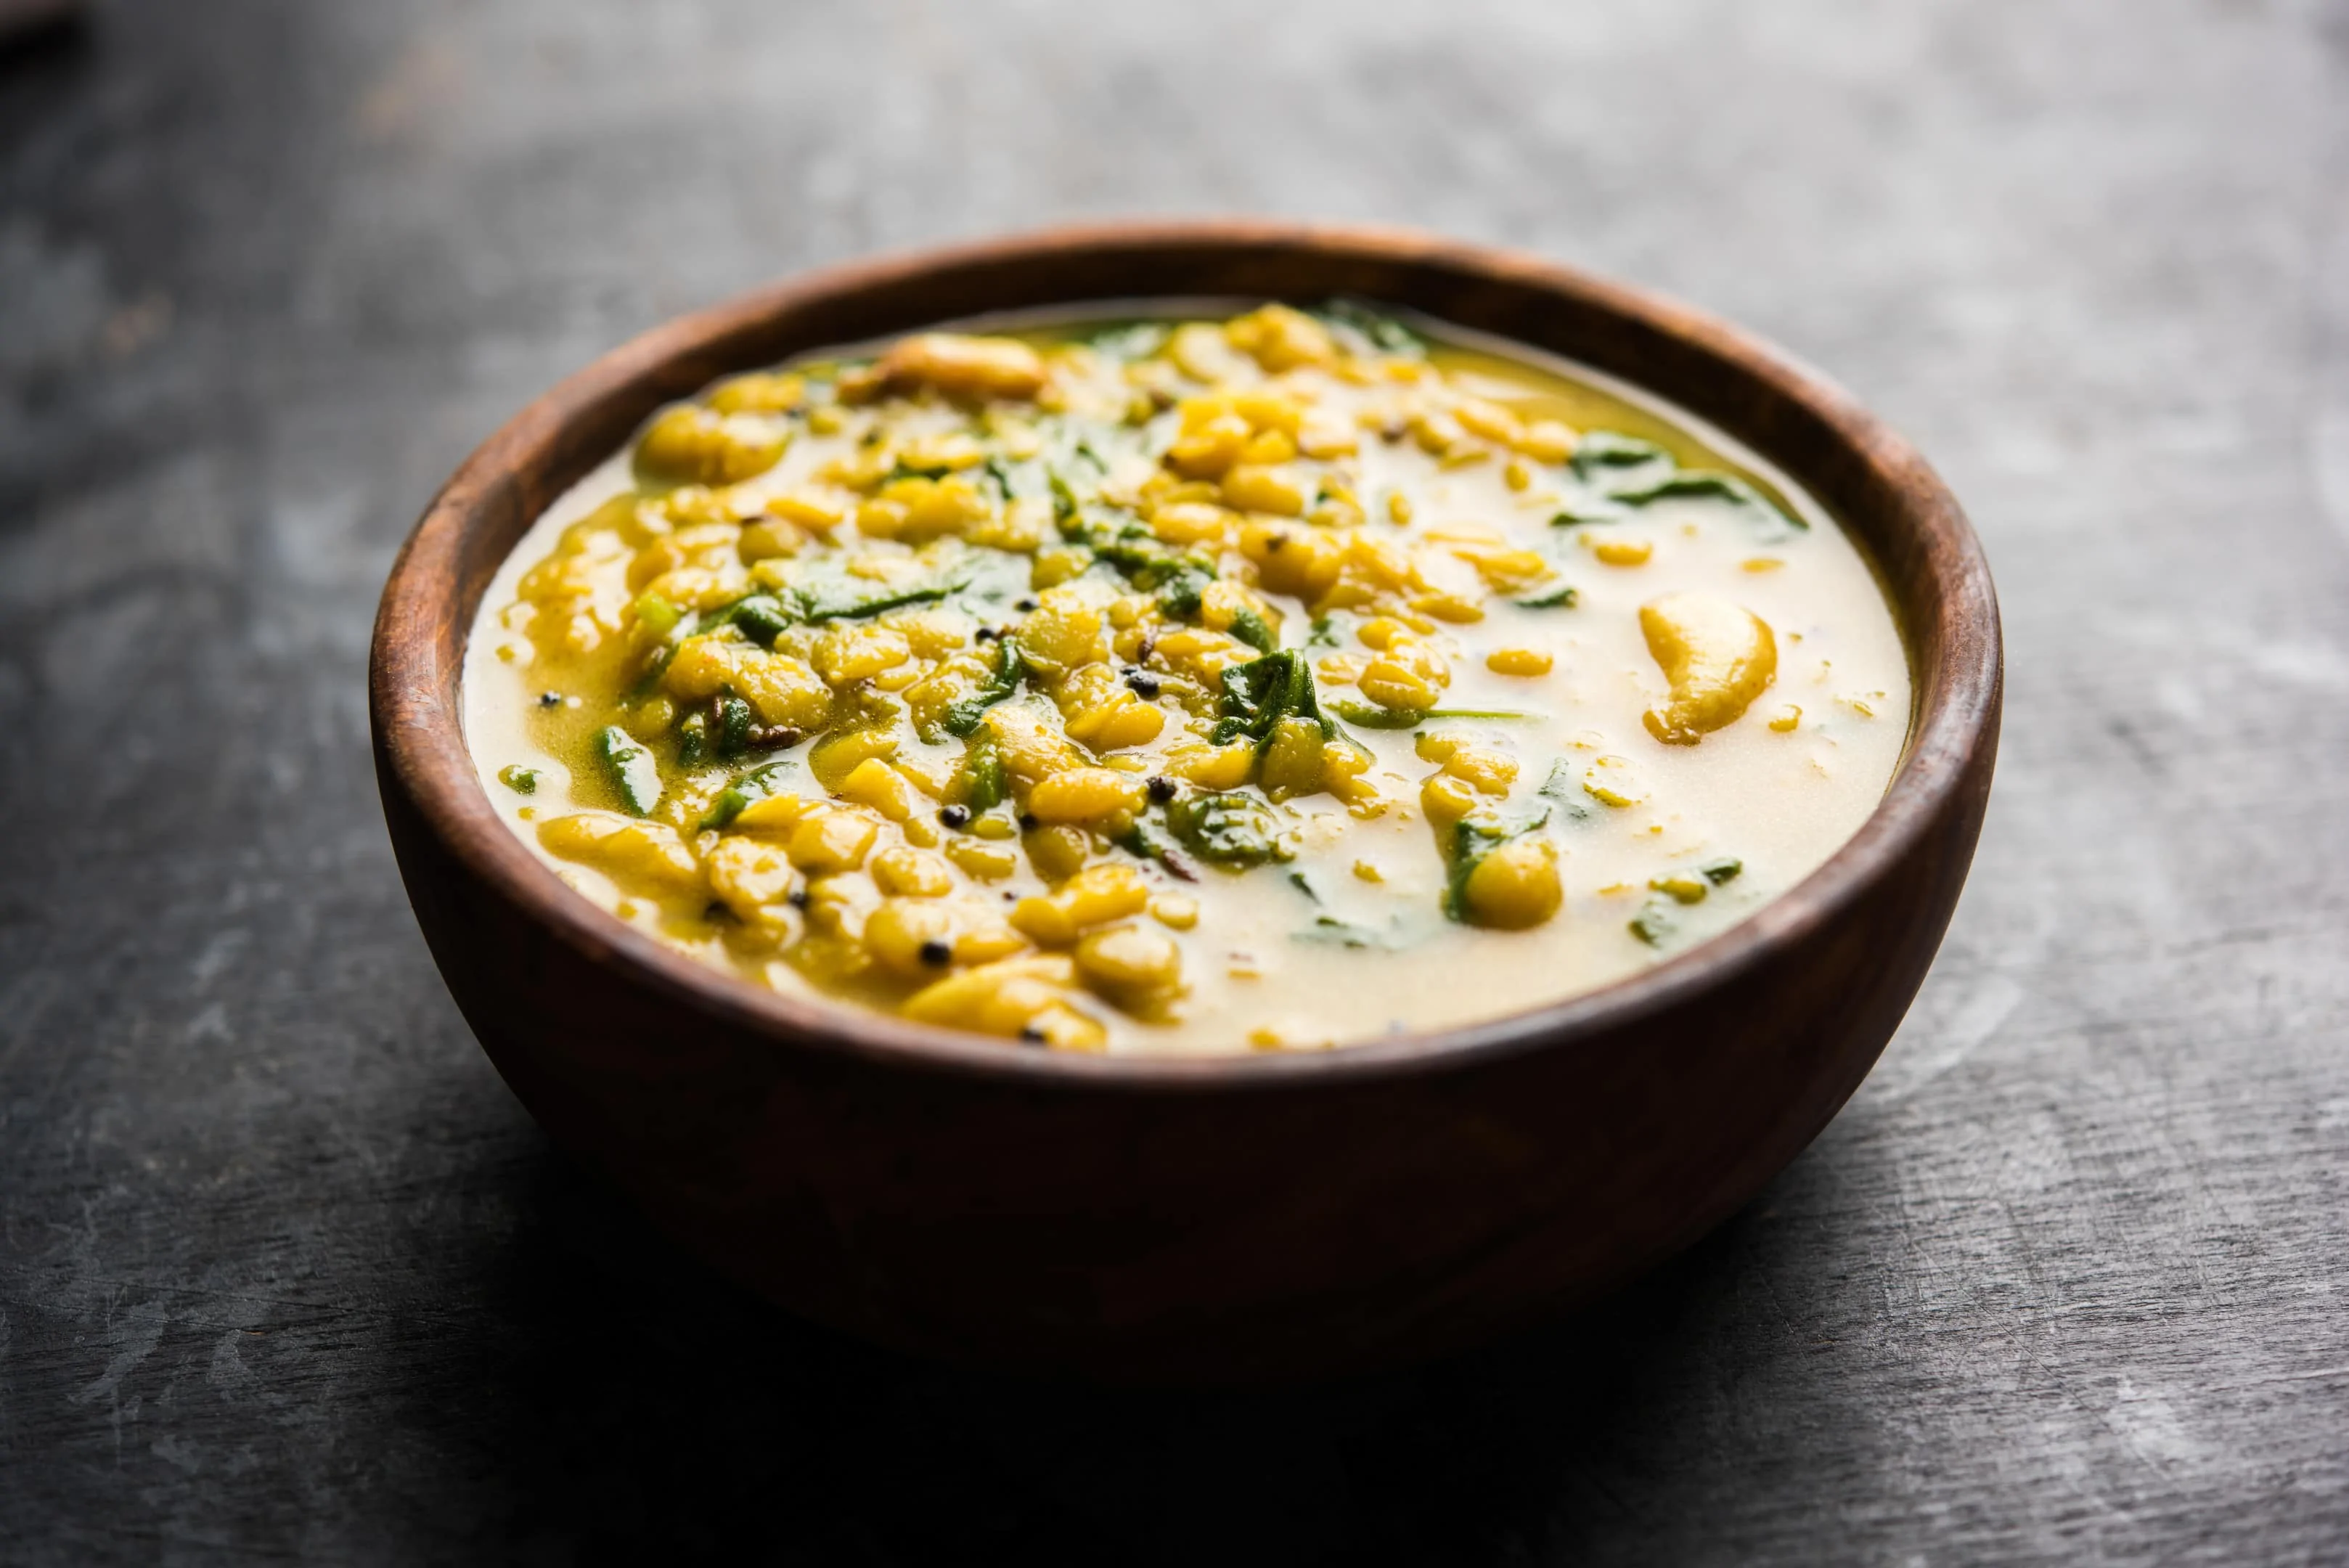 Yellow split peas and spinach soup. Spinach is one of the foods that reduce cortisol.